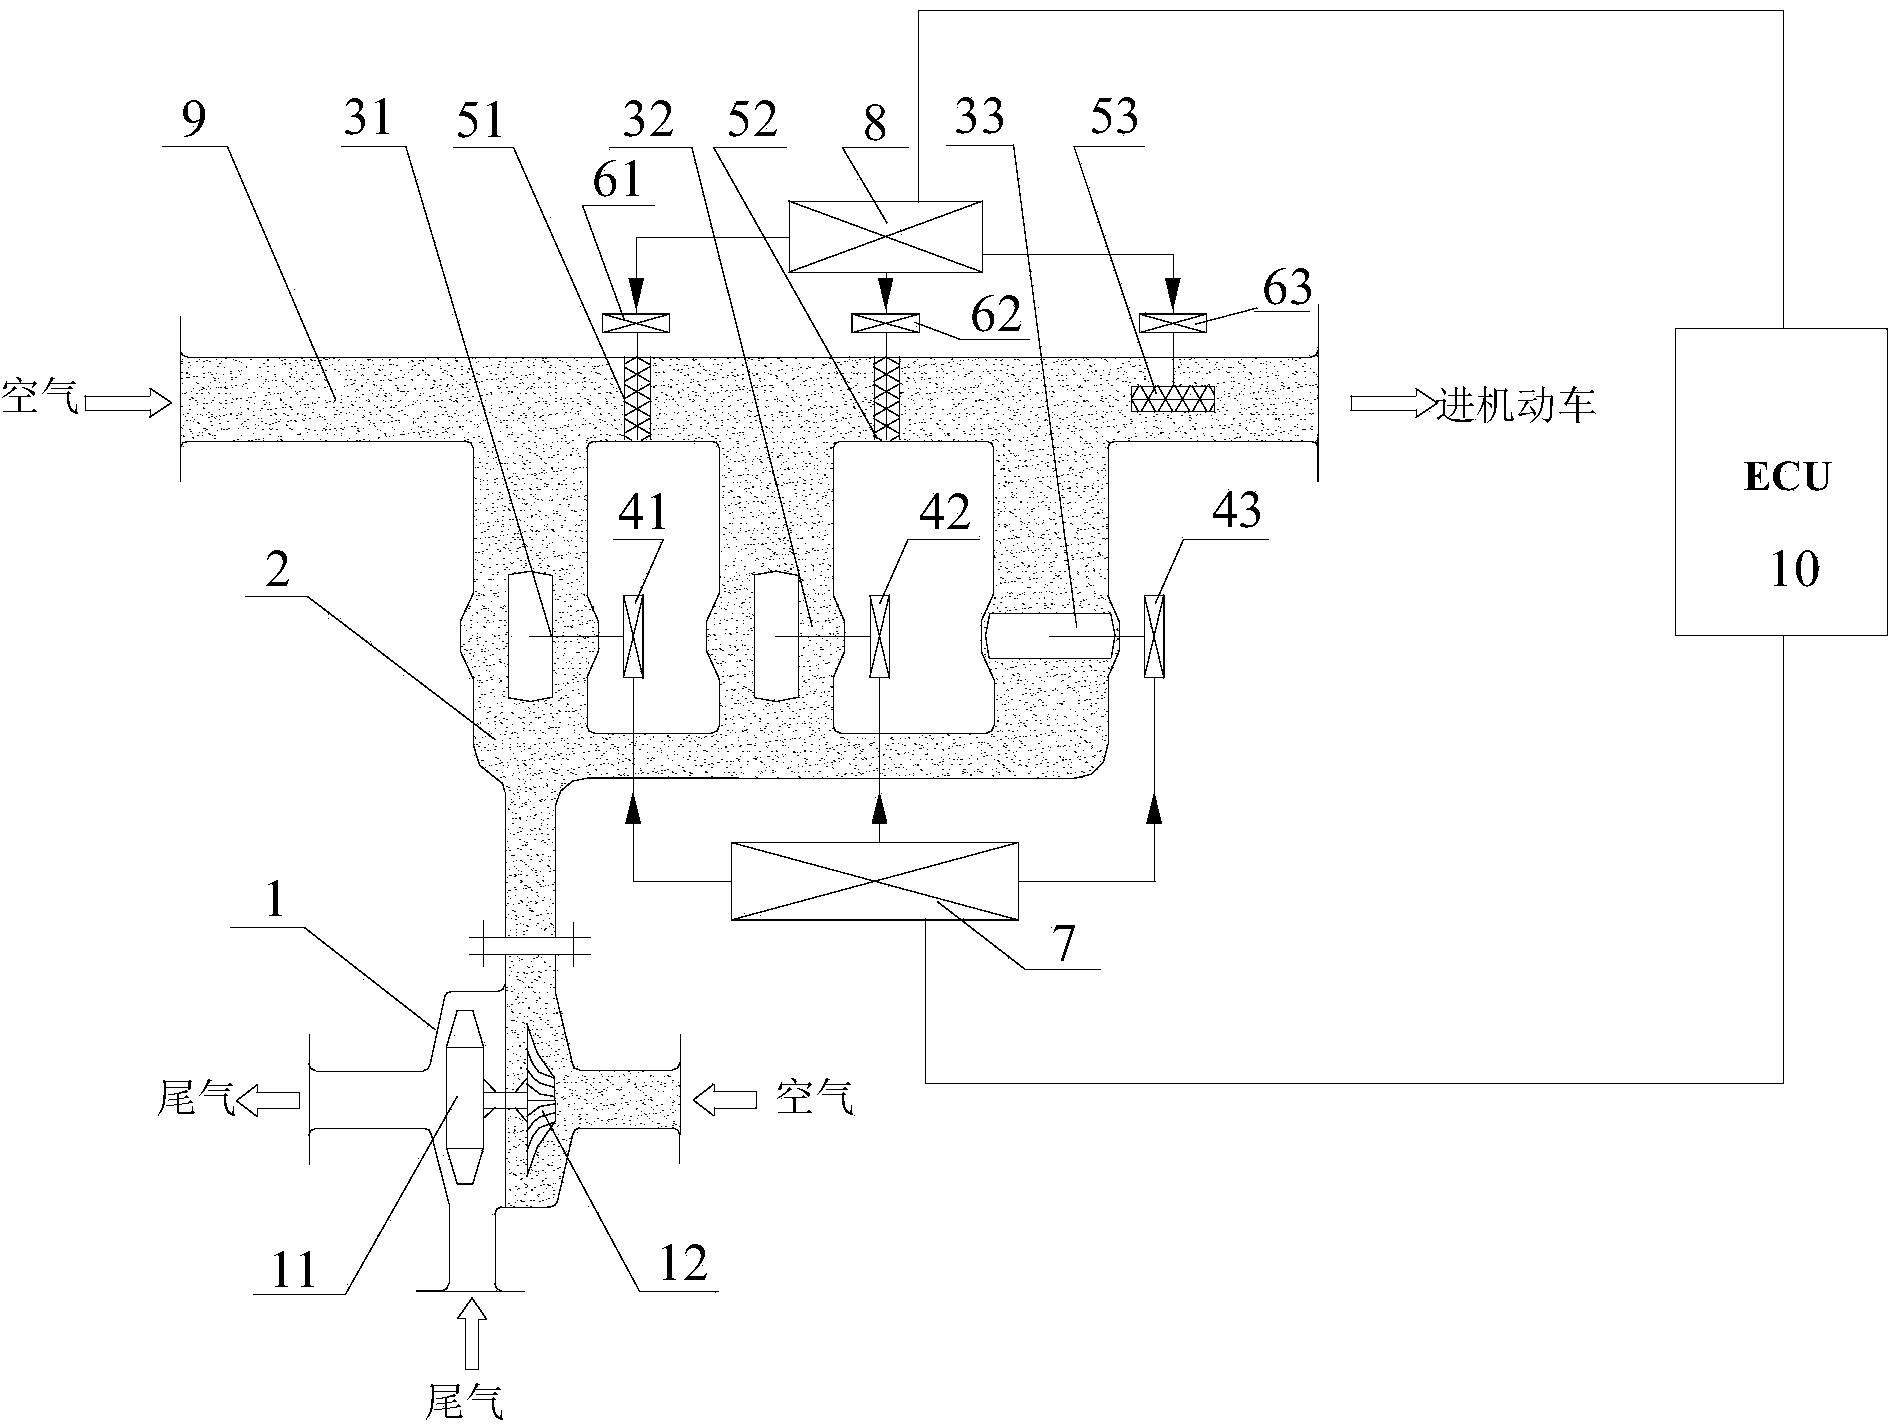 Multi-stage automatic oxygen enrichment control system for motor vehicle